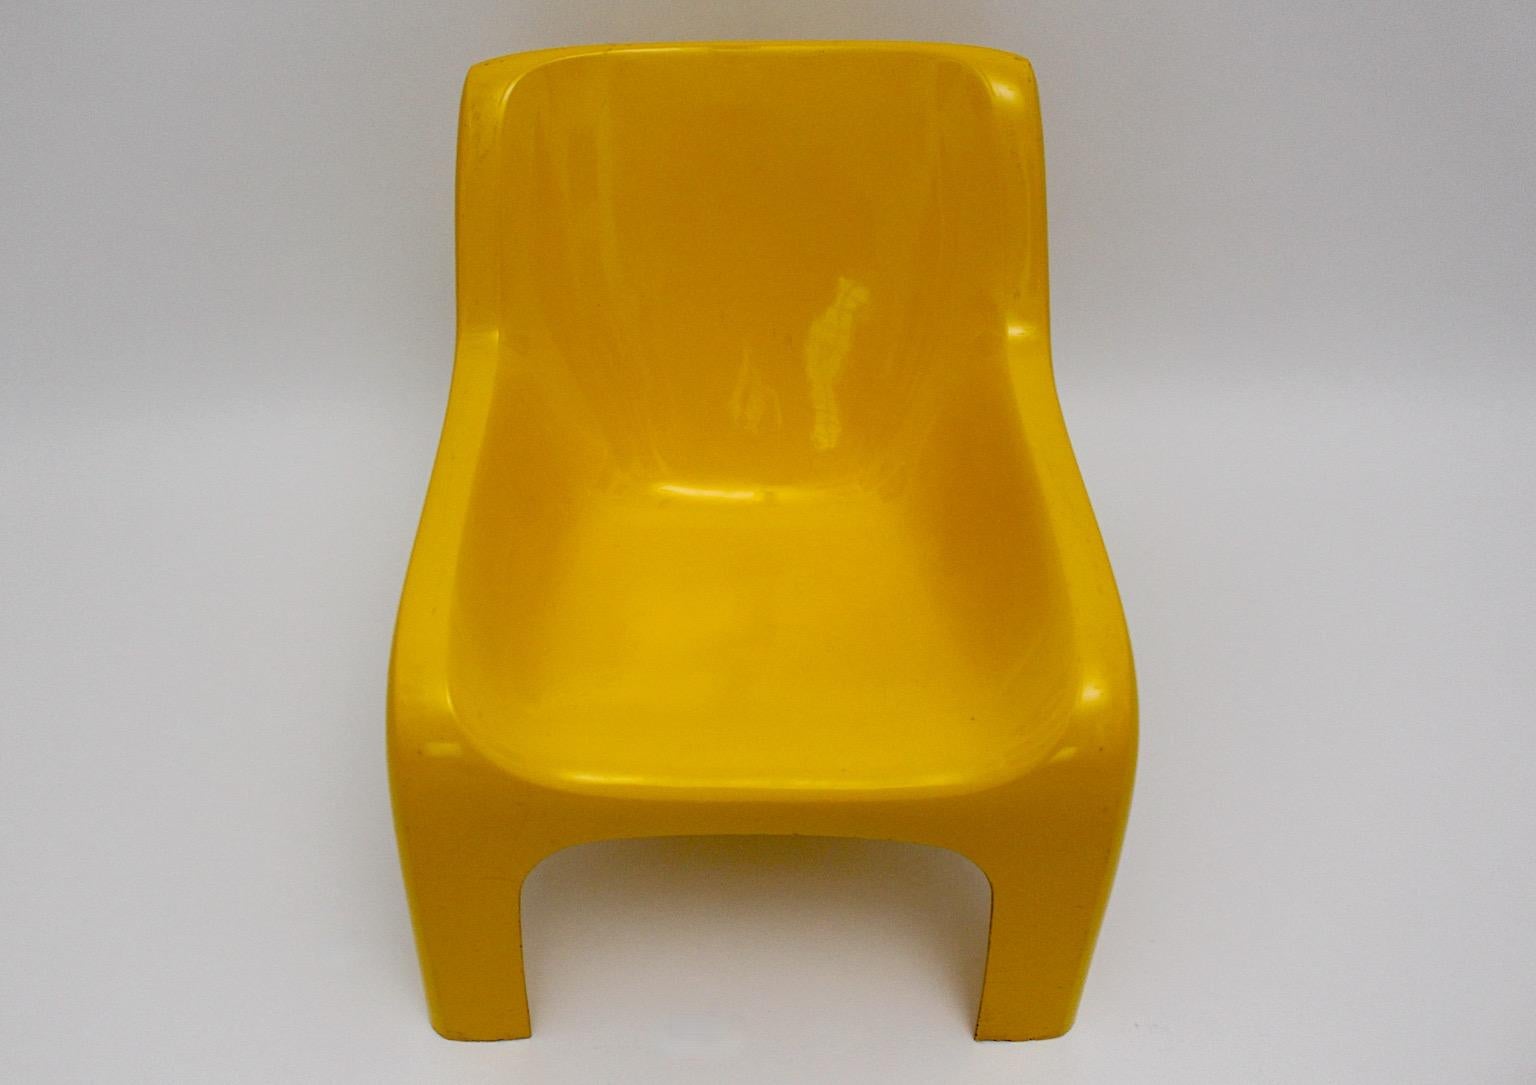 Space Age vintage lounge chair model Anatomia from plastic in yellow color by Ahti Kotikoski 1968s for Asko Finland.
A great lounge chair from plastic in sunny yellow color tone by Ahti Kotikoski for Asko 1968, Finland.
Won an award by the